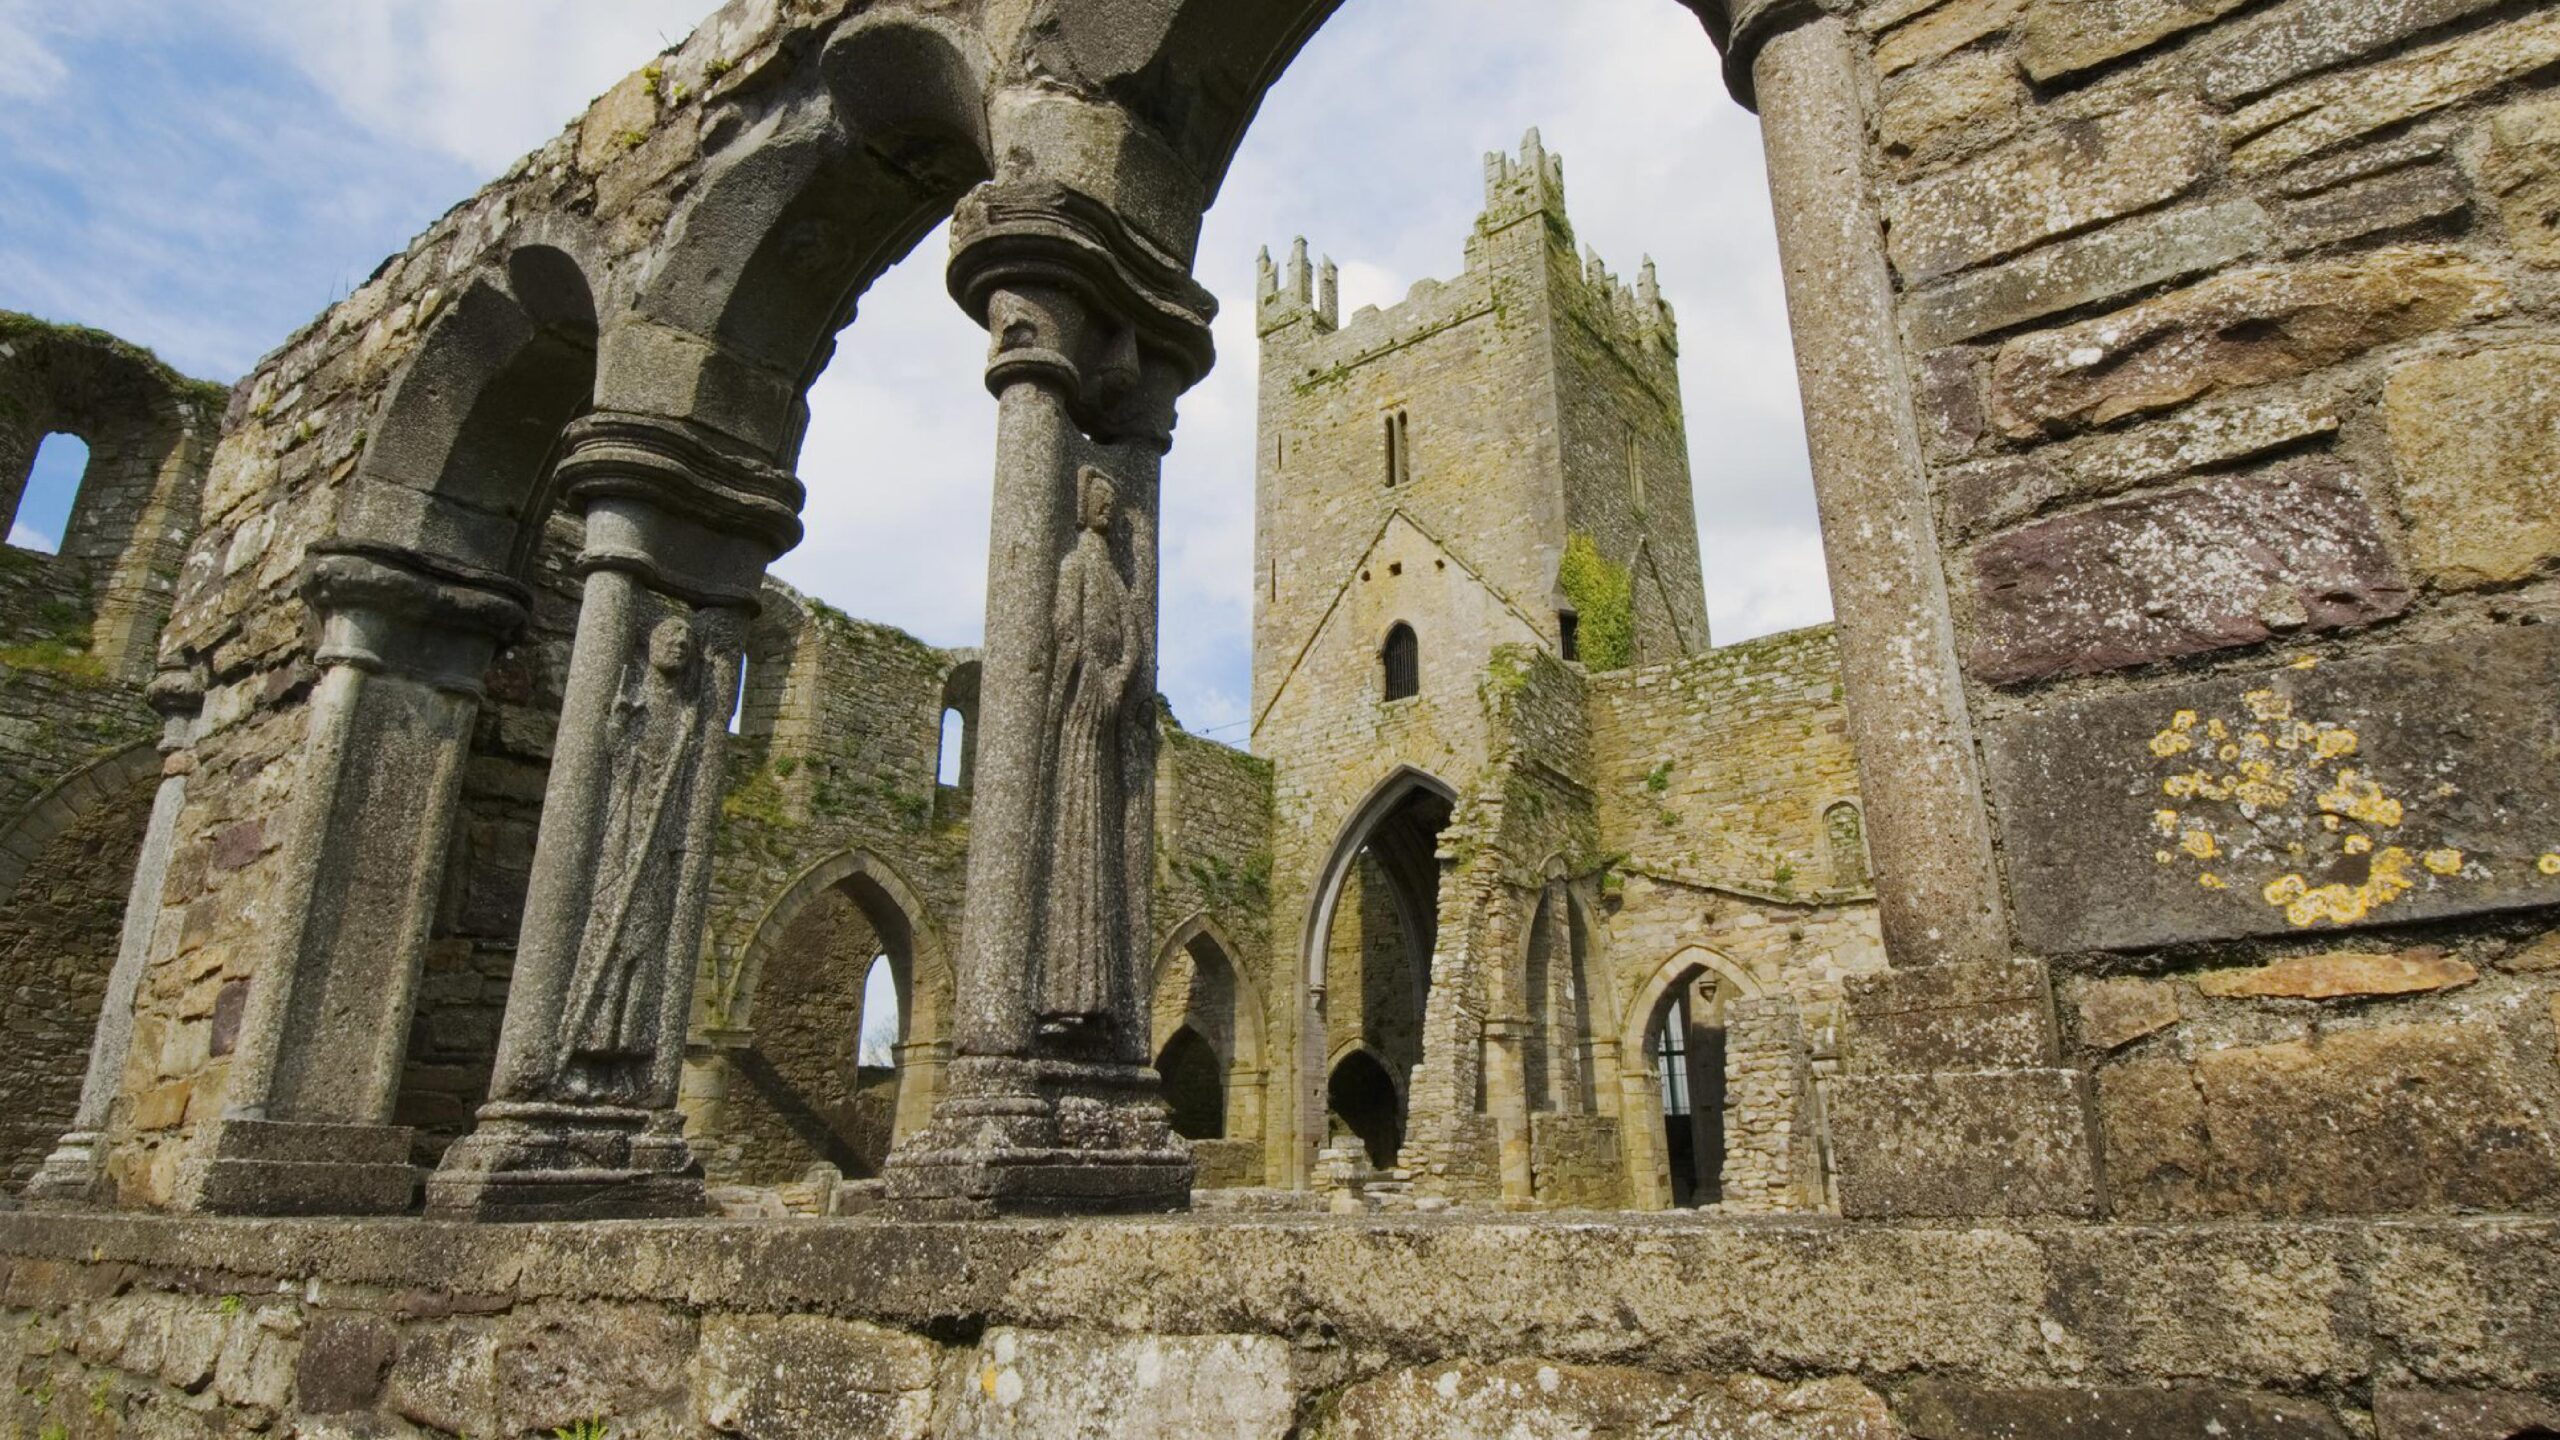 A panoramic view of historic monasteries in Ireland.